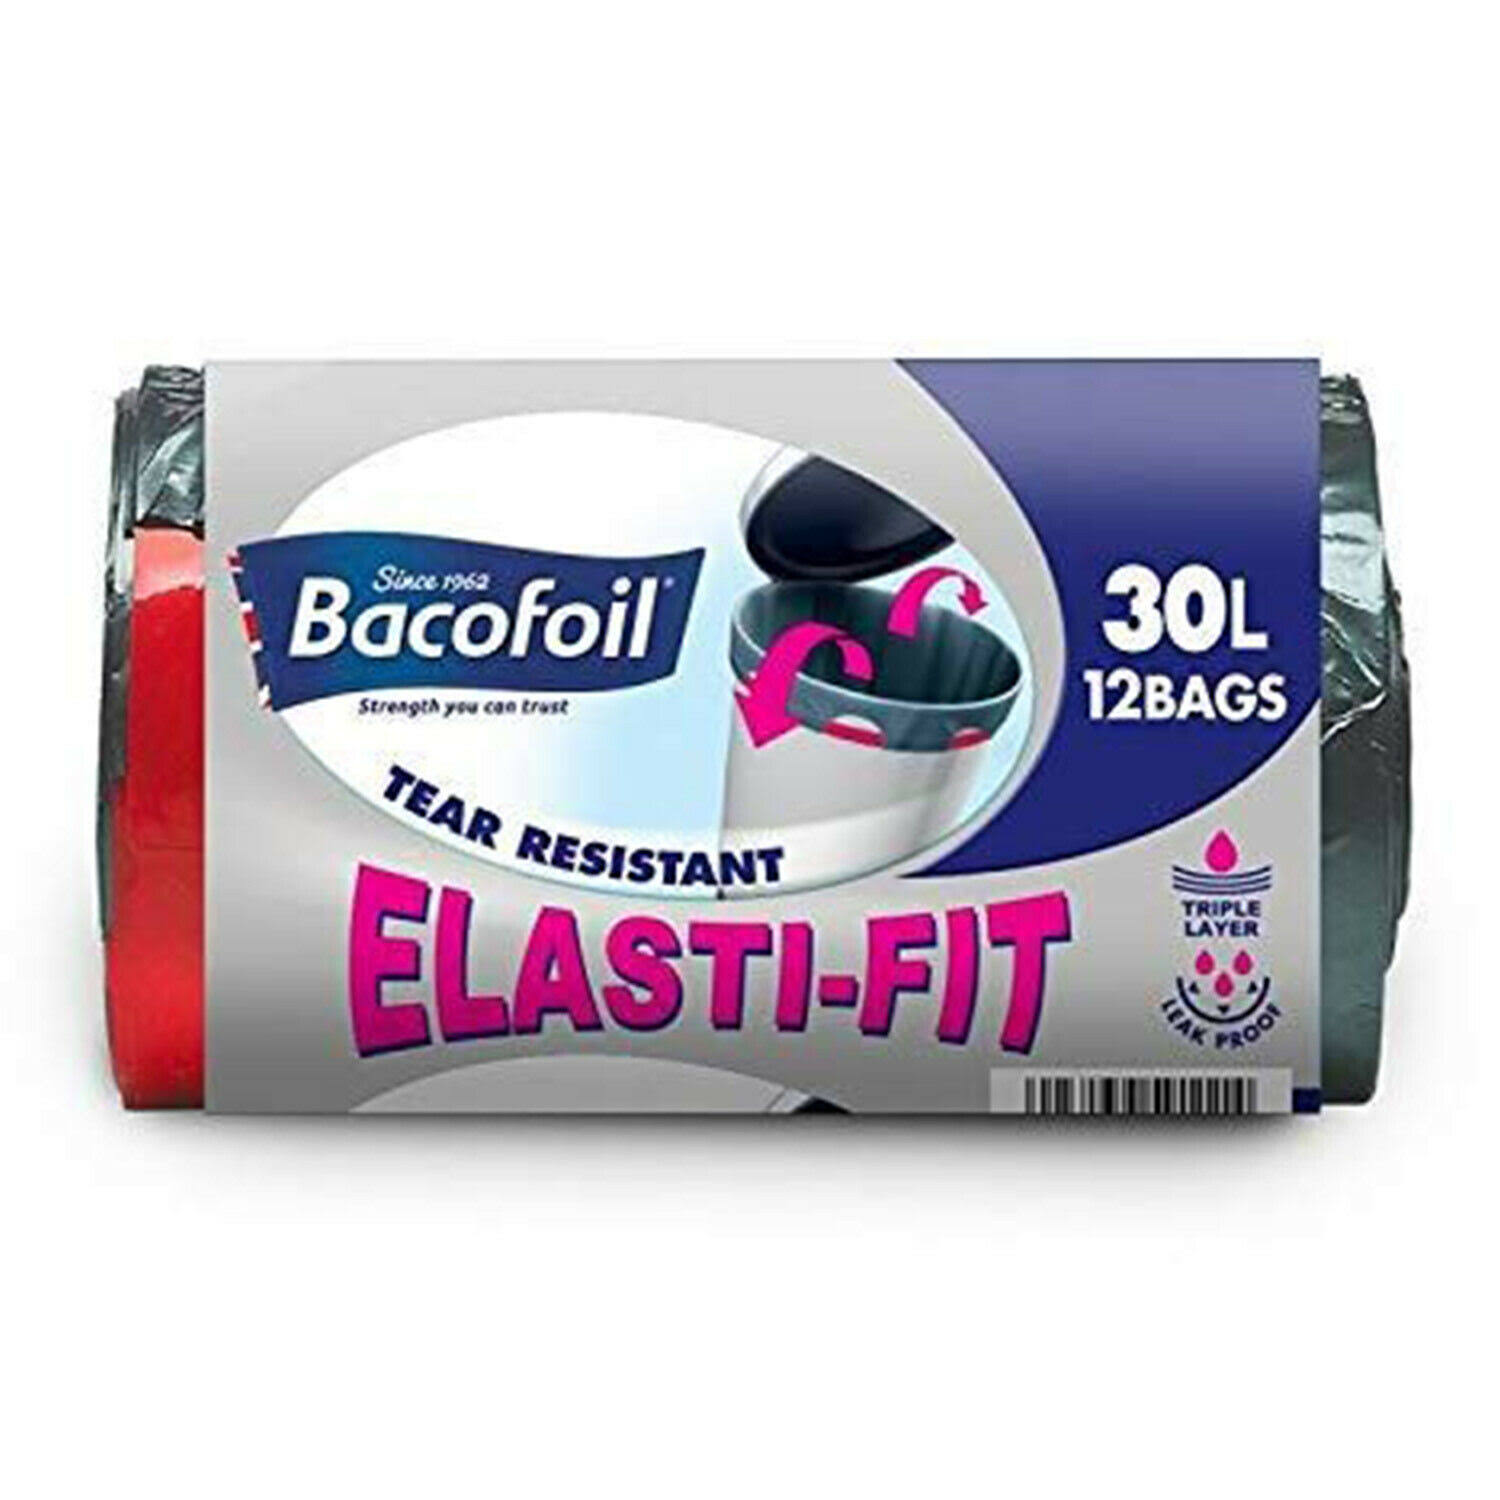 Bacofoil Elasti-Fit Kitchen Bin Liners With Elastic Tie Handles, 30L x 12 Bags